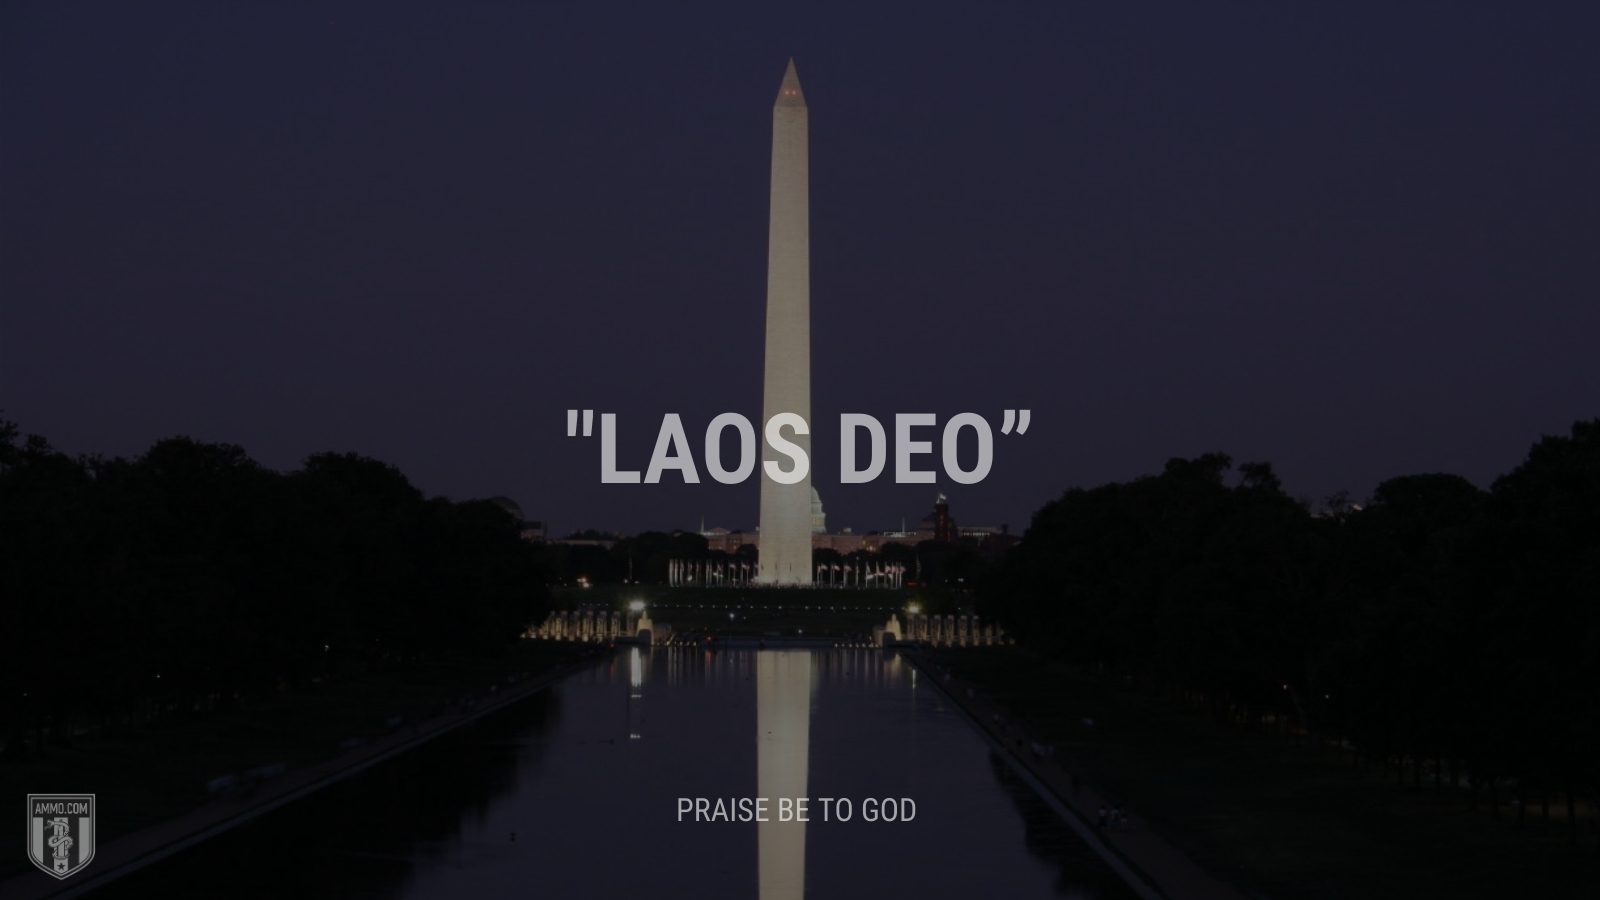 “Laos Deo” - Praise be to God